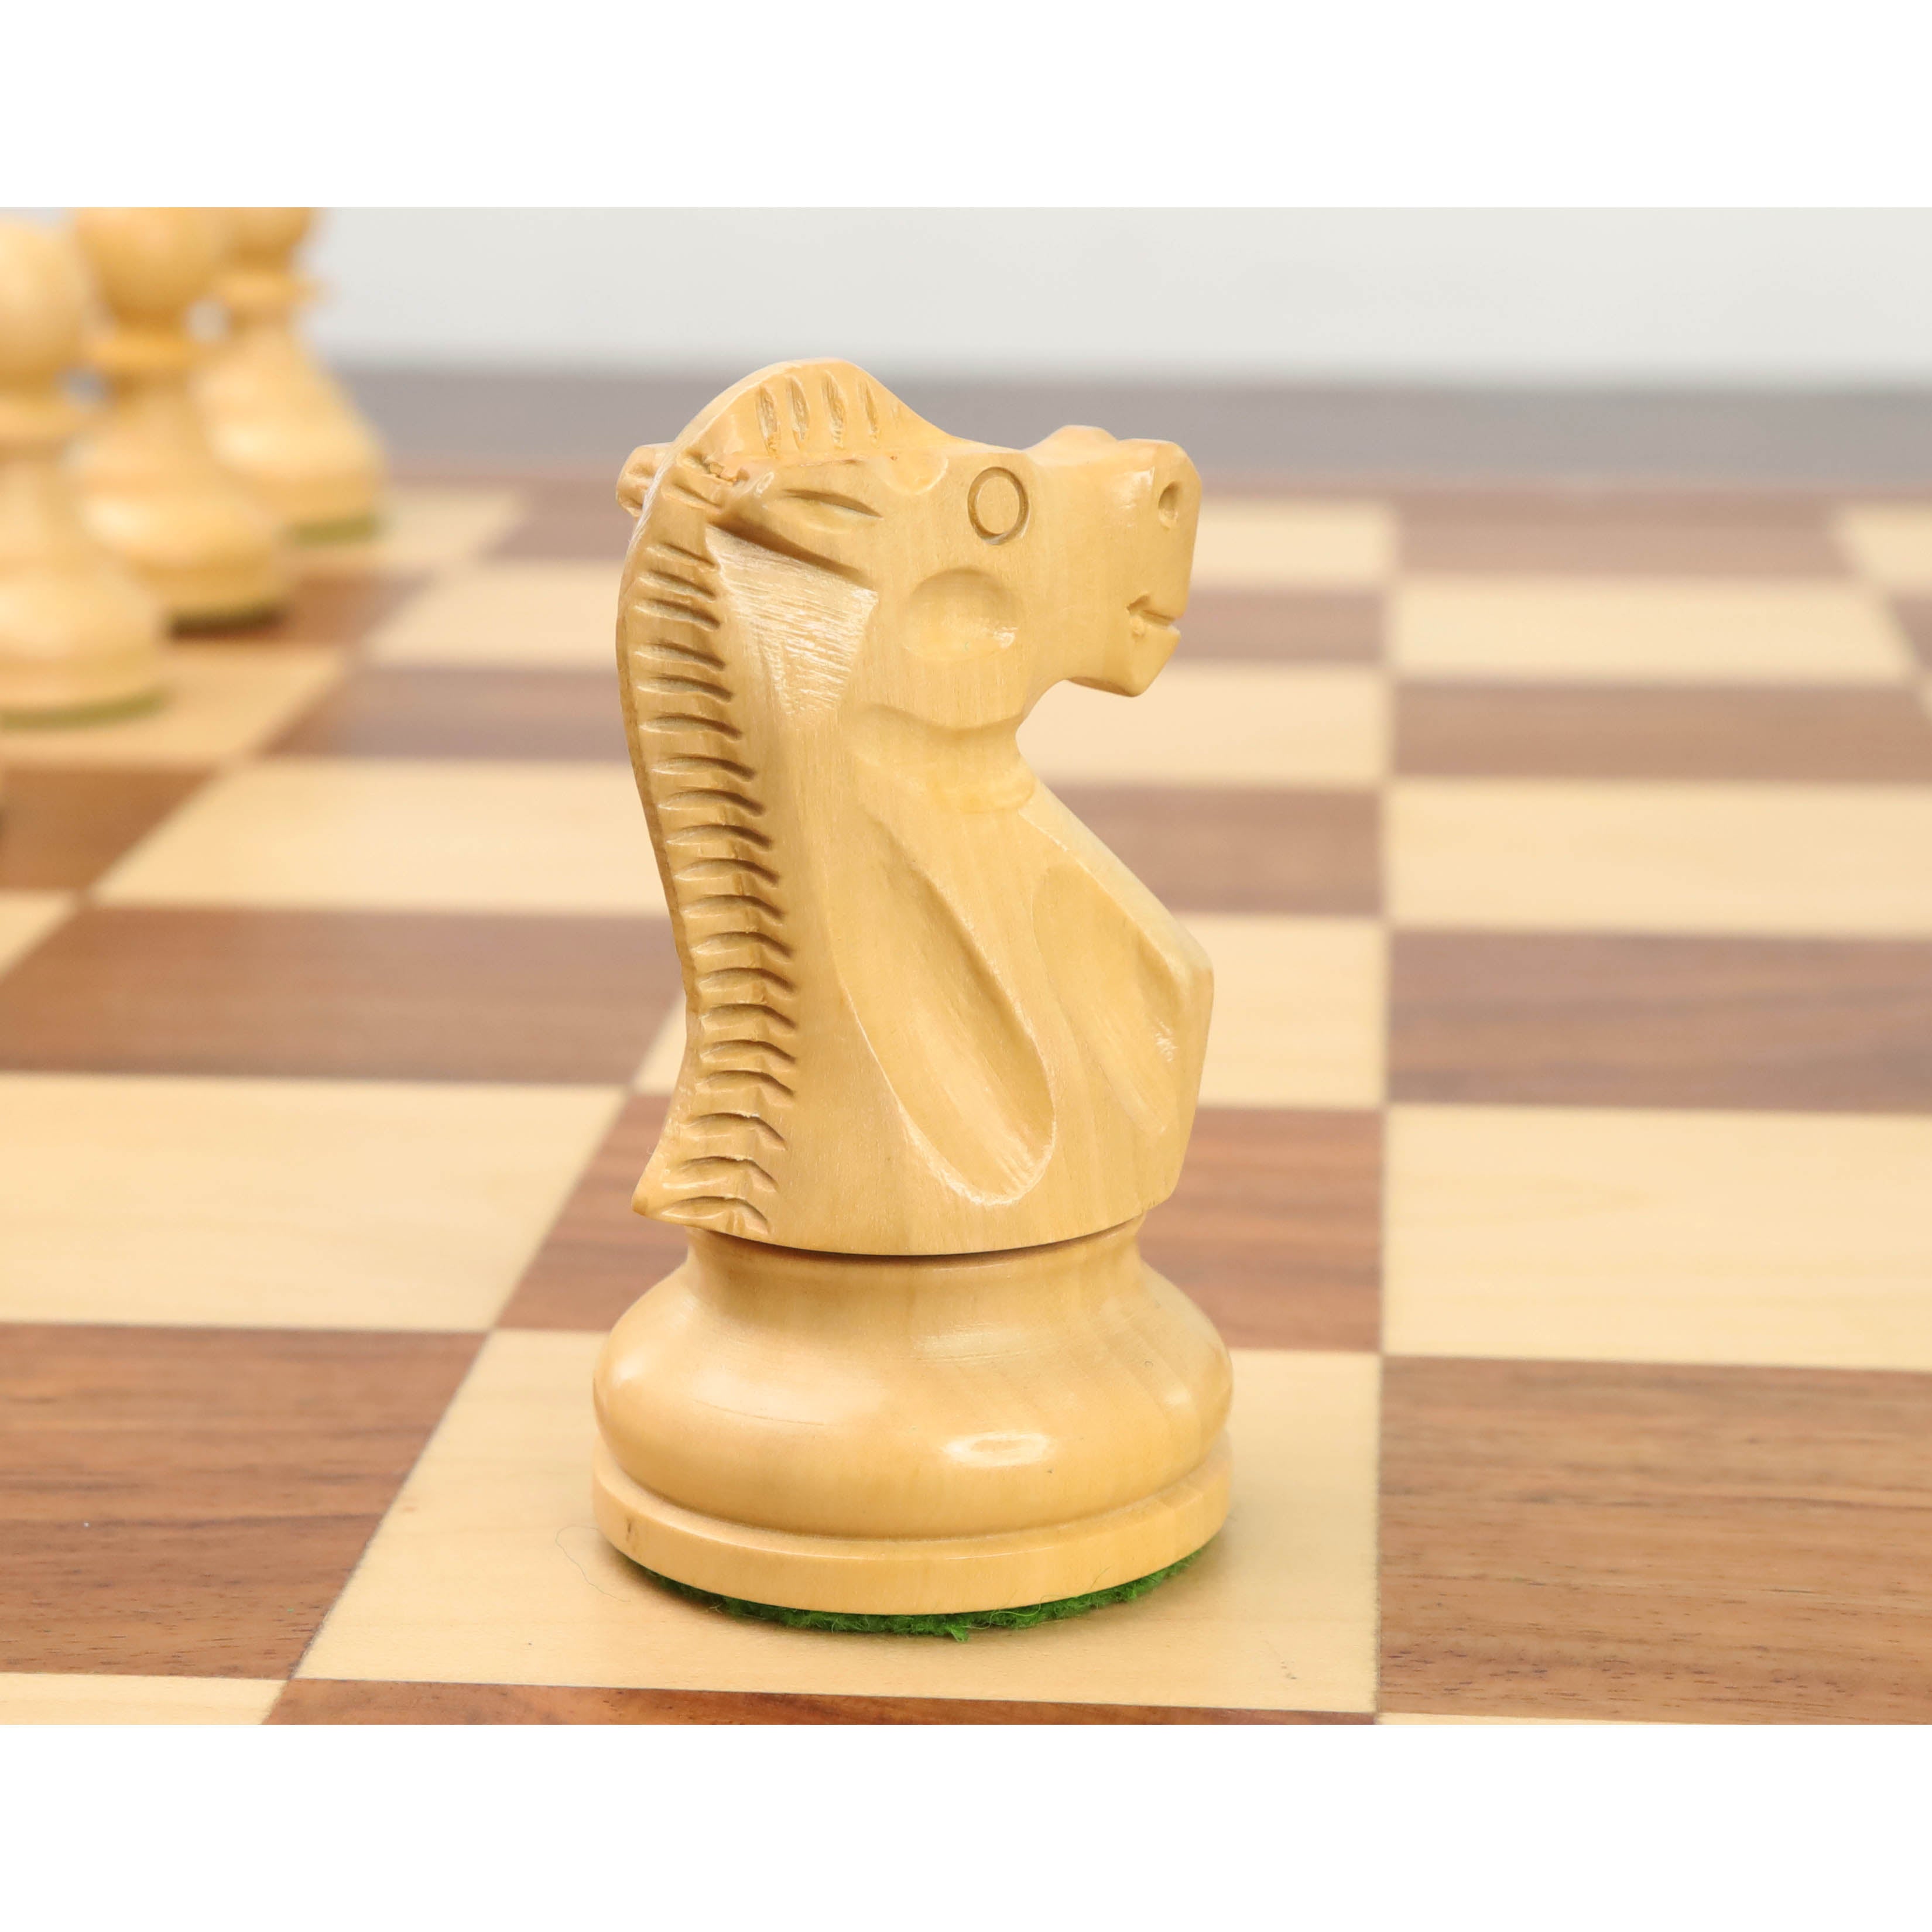 The Professional Series Tournament Staunton Weighted Chess Pieces in  Sheesham and Boxwood - 3.8 King